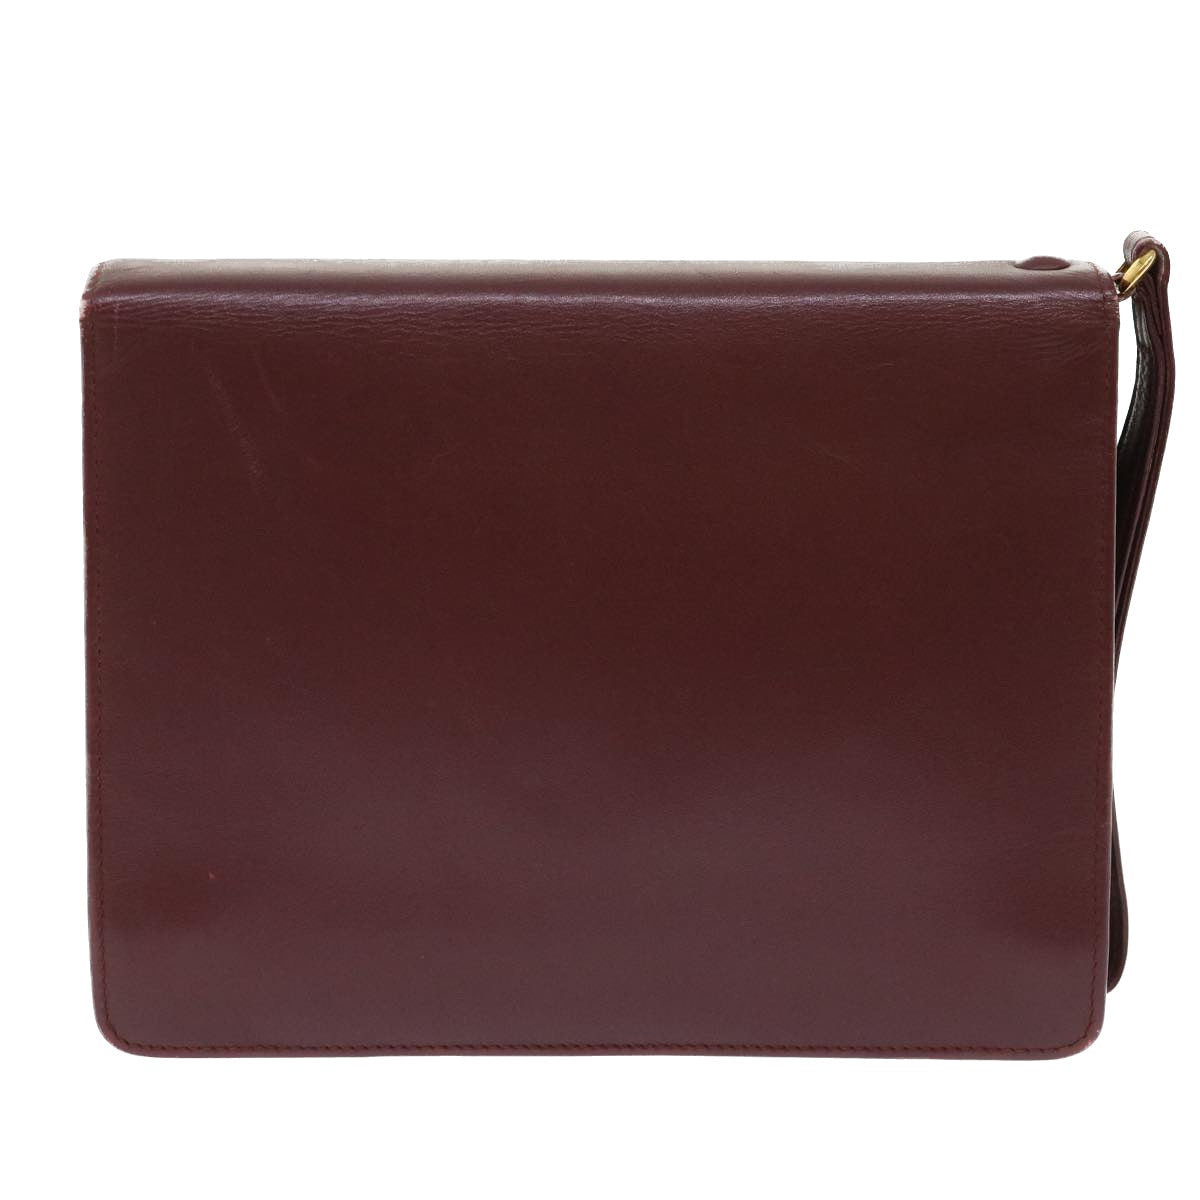 CARTIER Clutch Bag Leather Wine Red Auth am4649 - 0